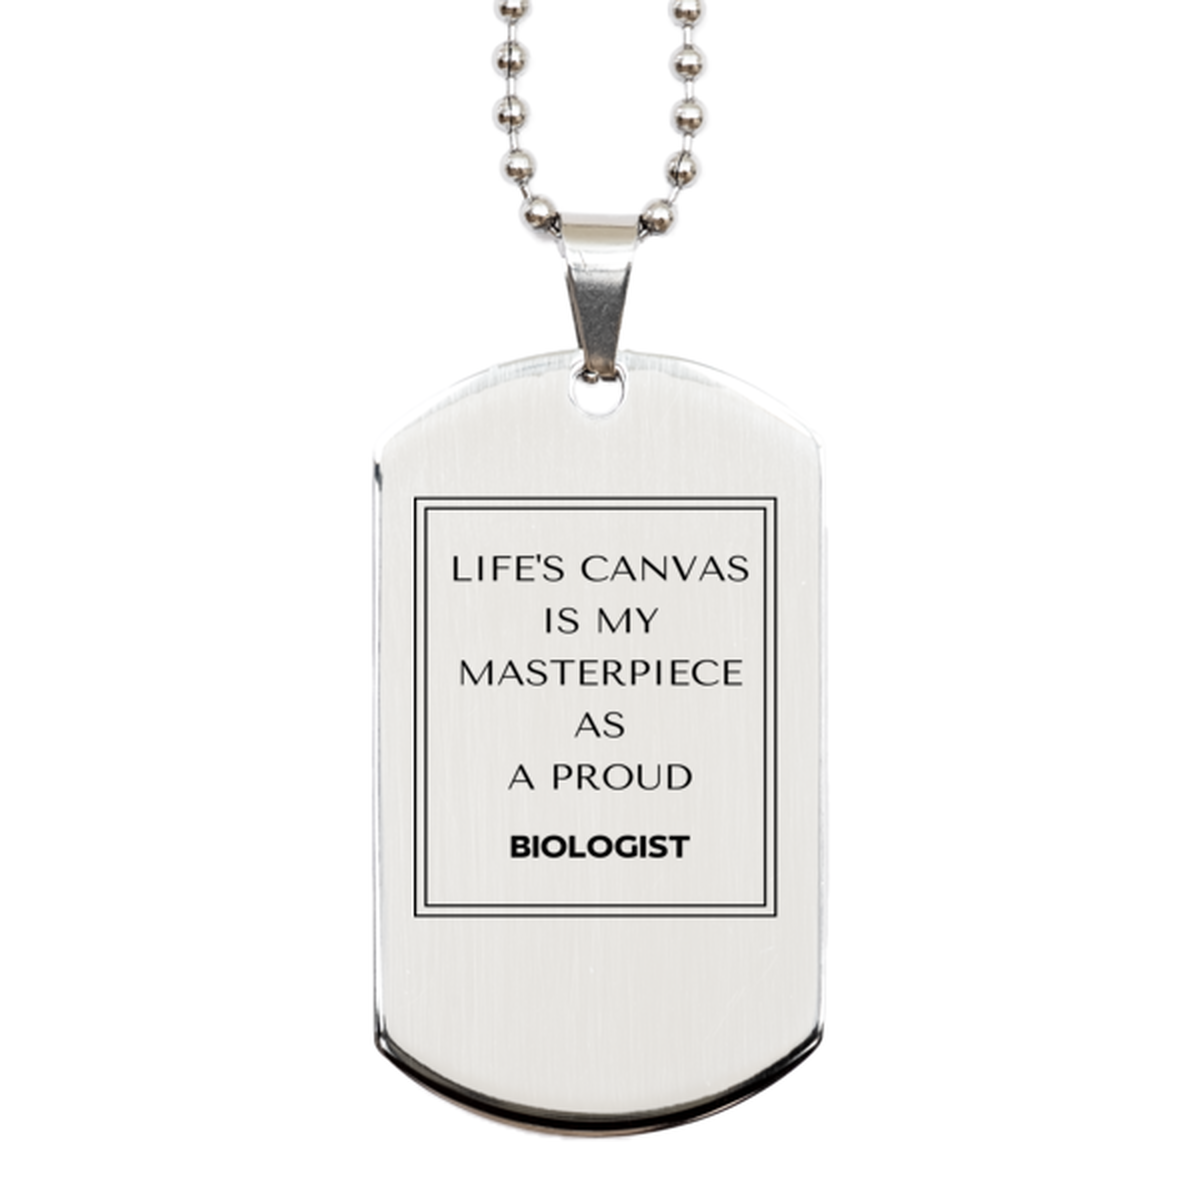 Proud Biologist Gifts, Life's canvas is my masterpiece, Epic Birthday Christmas Unique Silver Dog Tag For Biologist, Coworkers, Men, Women, Friends